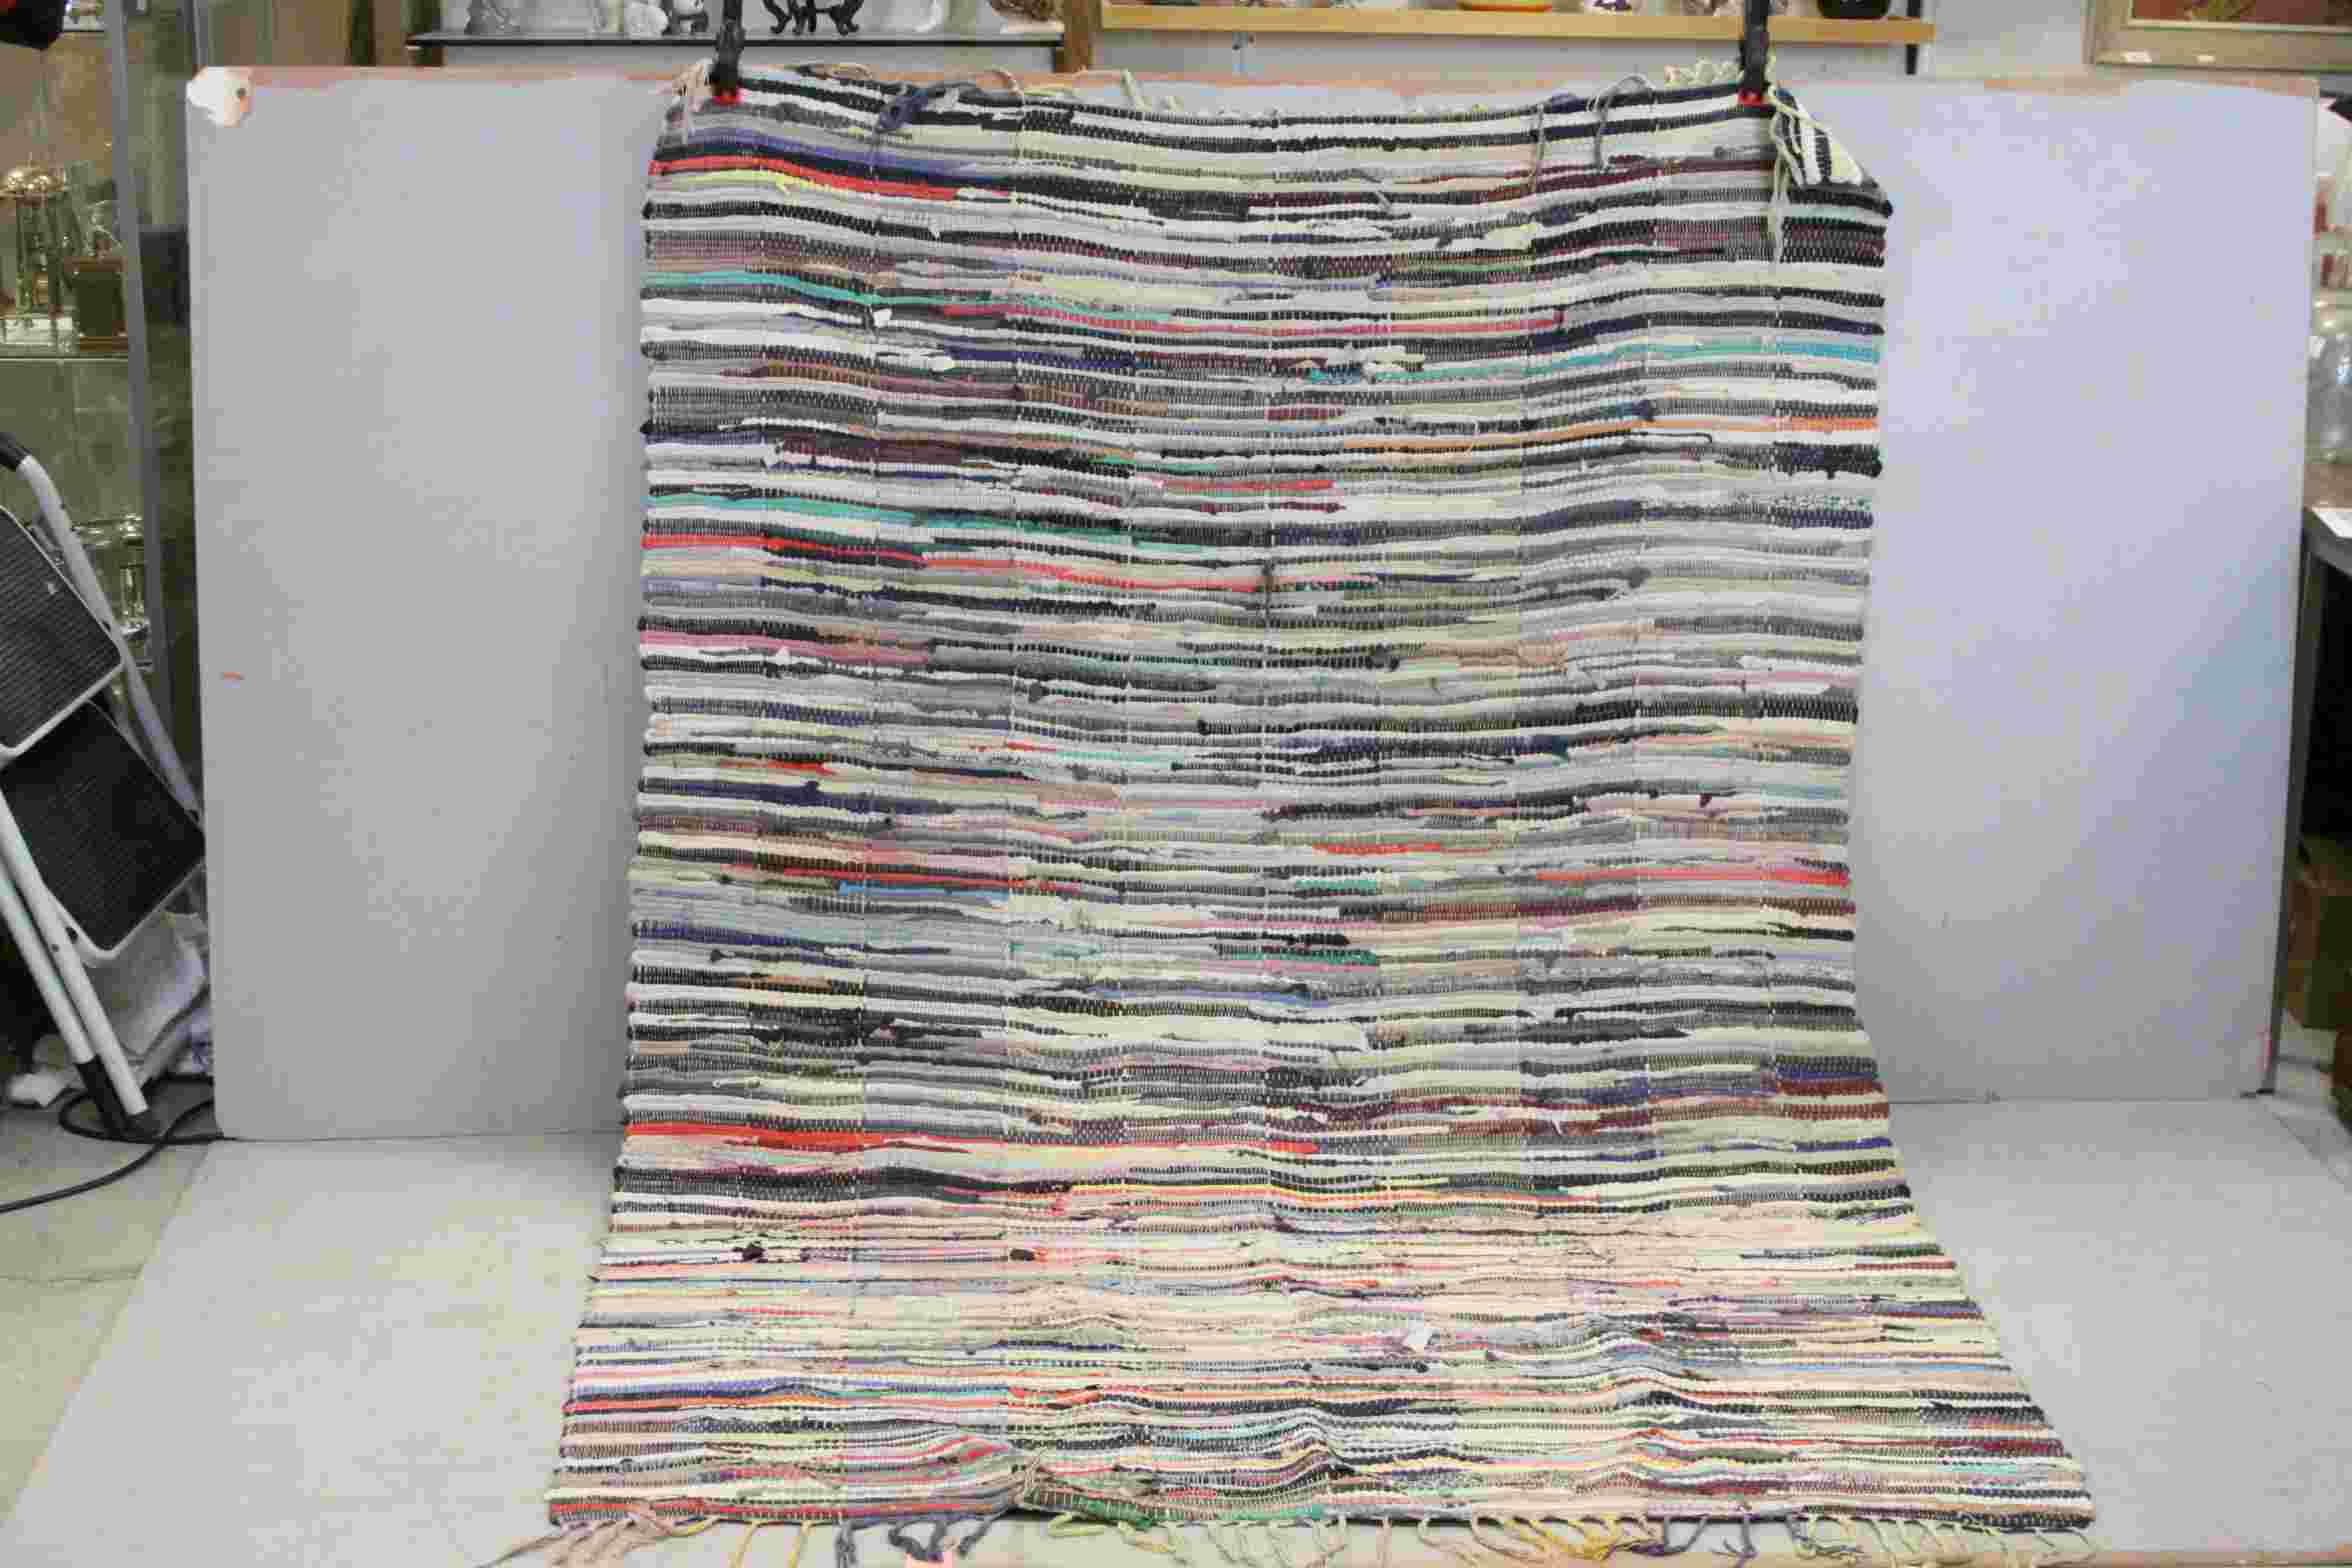 Hand Knotted Kelim Style Mulit-coloured Striped Rug, approx. 215cms x 140cms